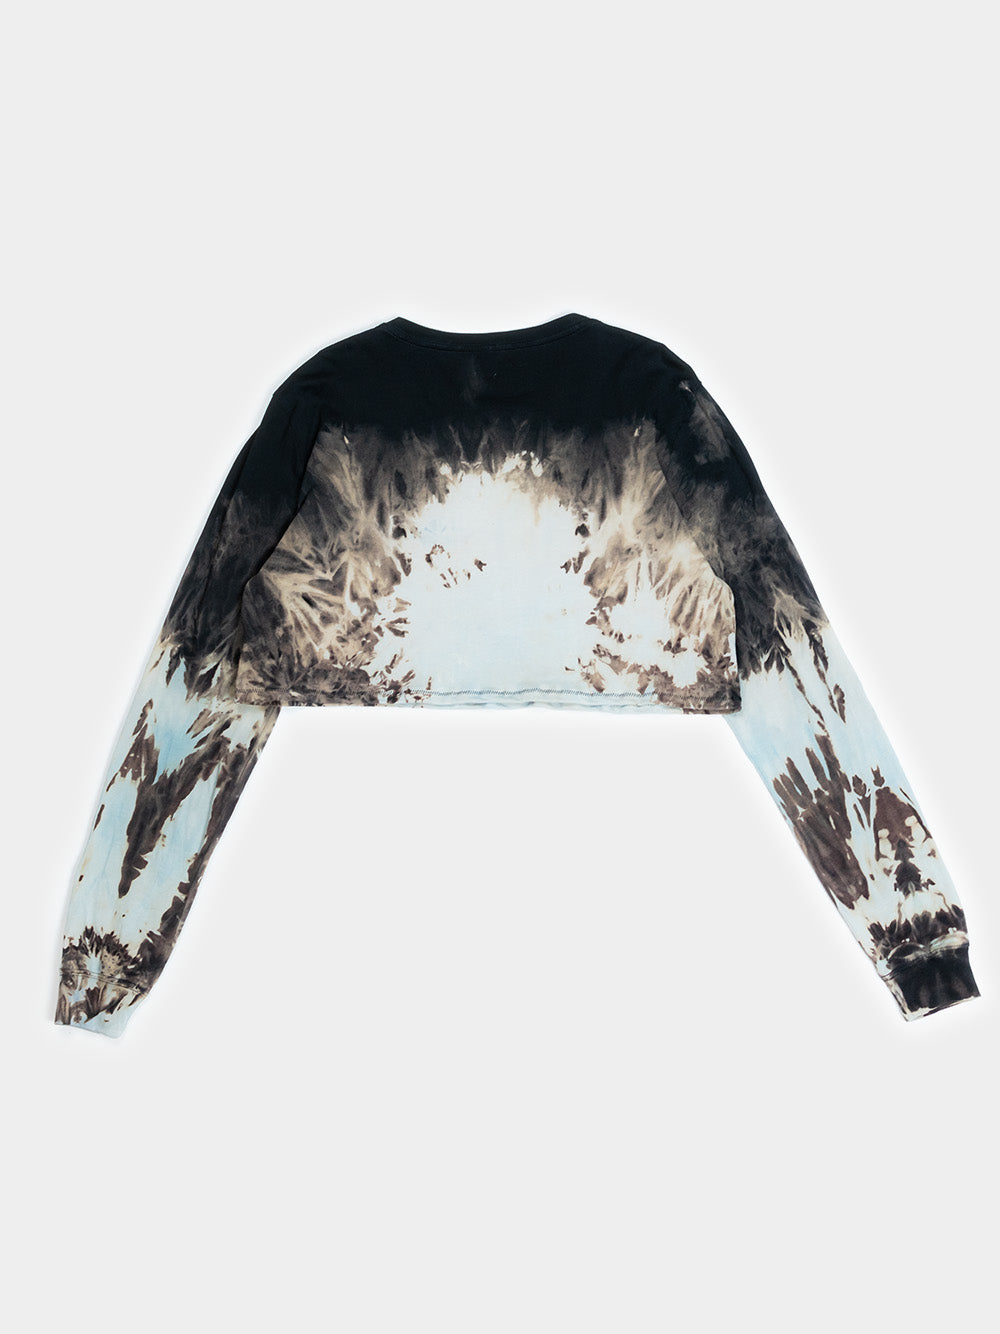 Illusion Of Fire - Crop Top (L)